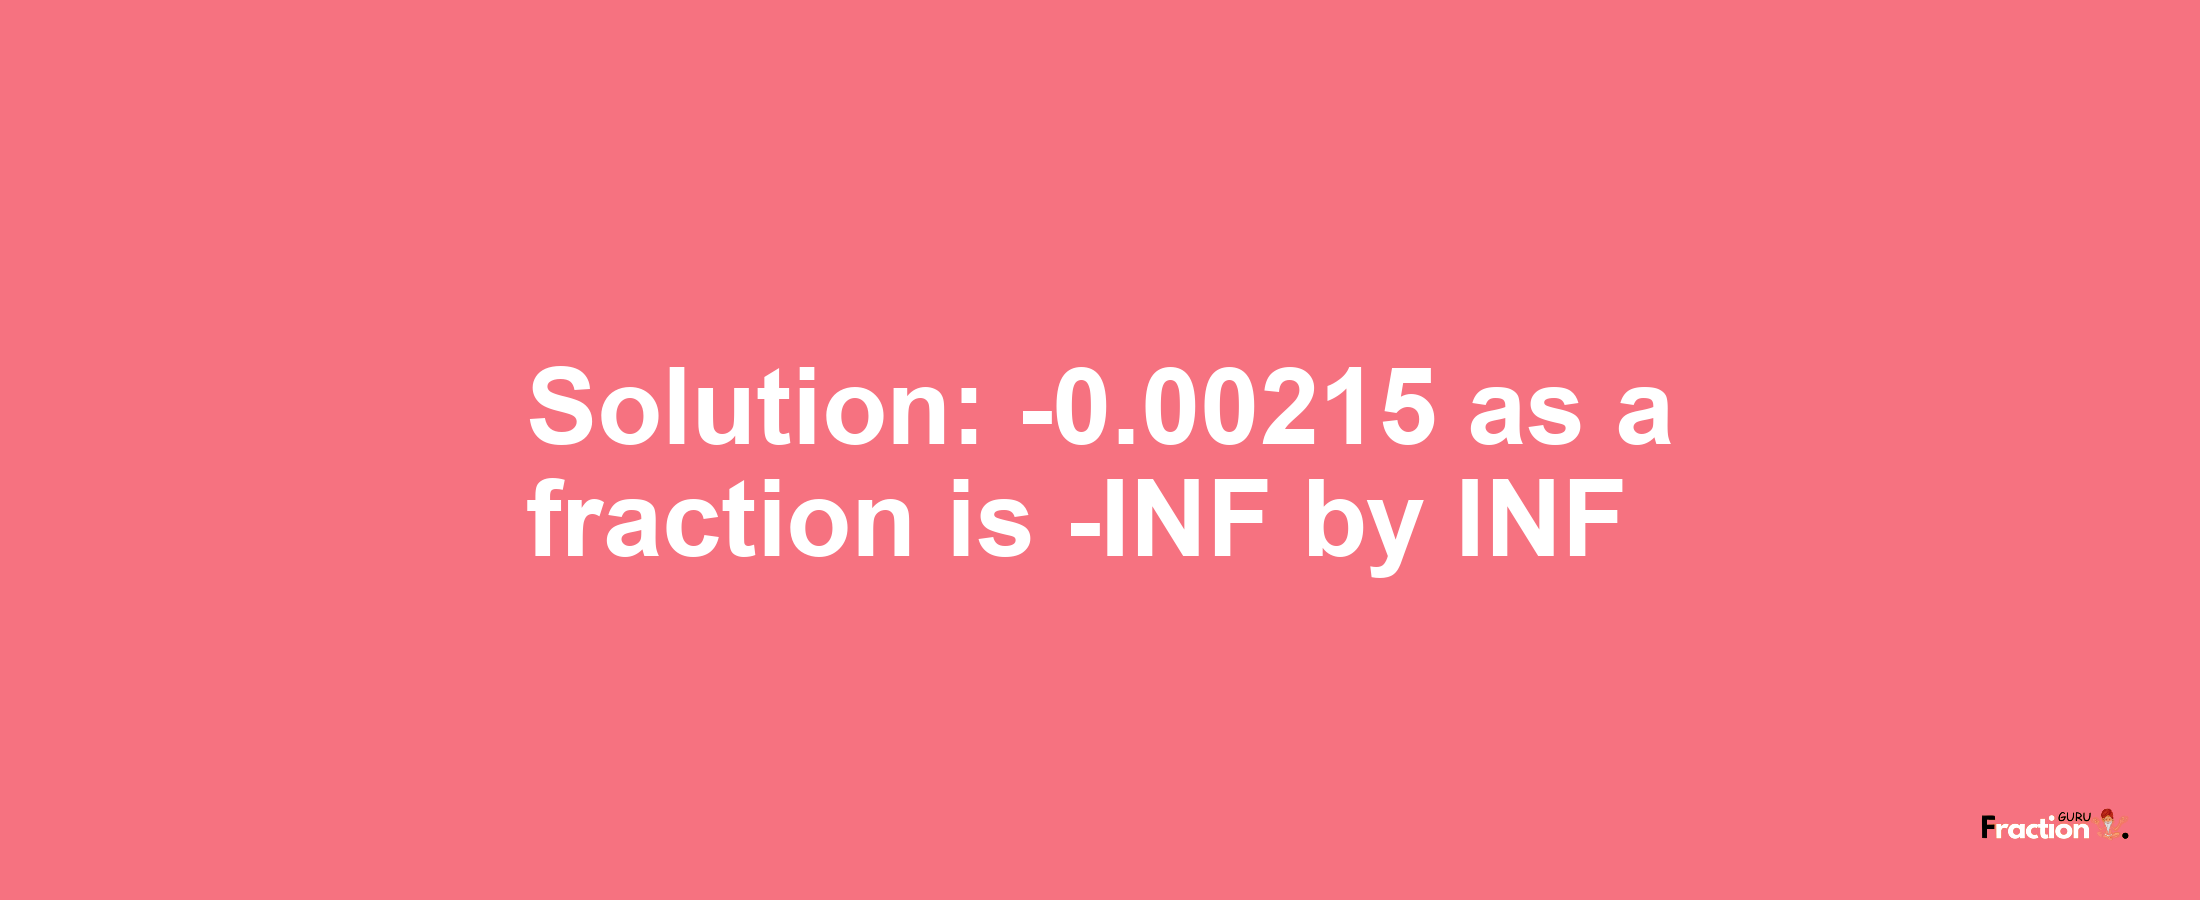 Solution:-0.00215 as a fraction is -INF/INF